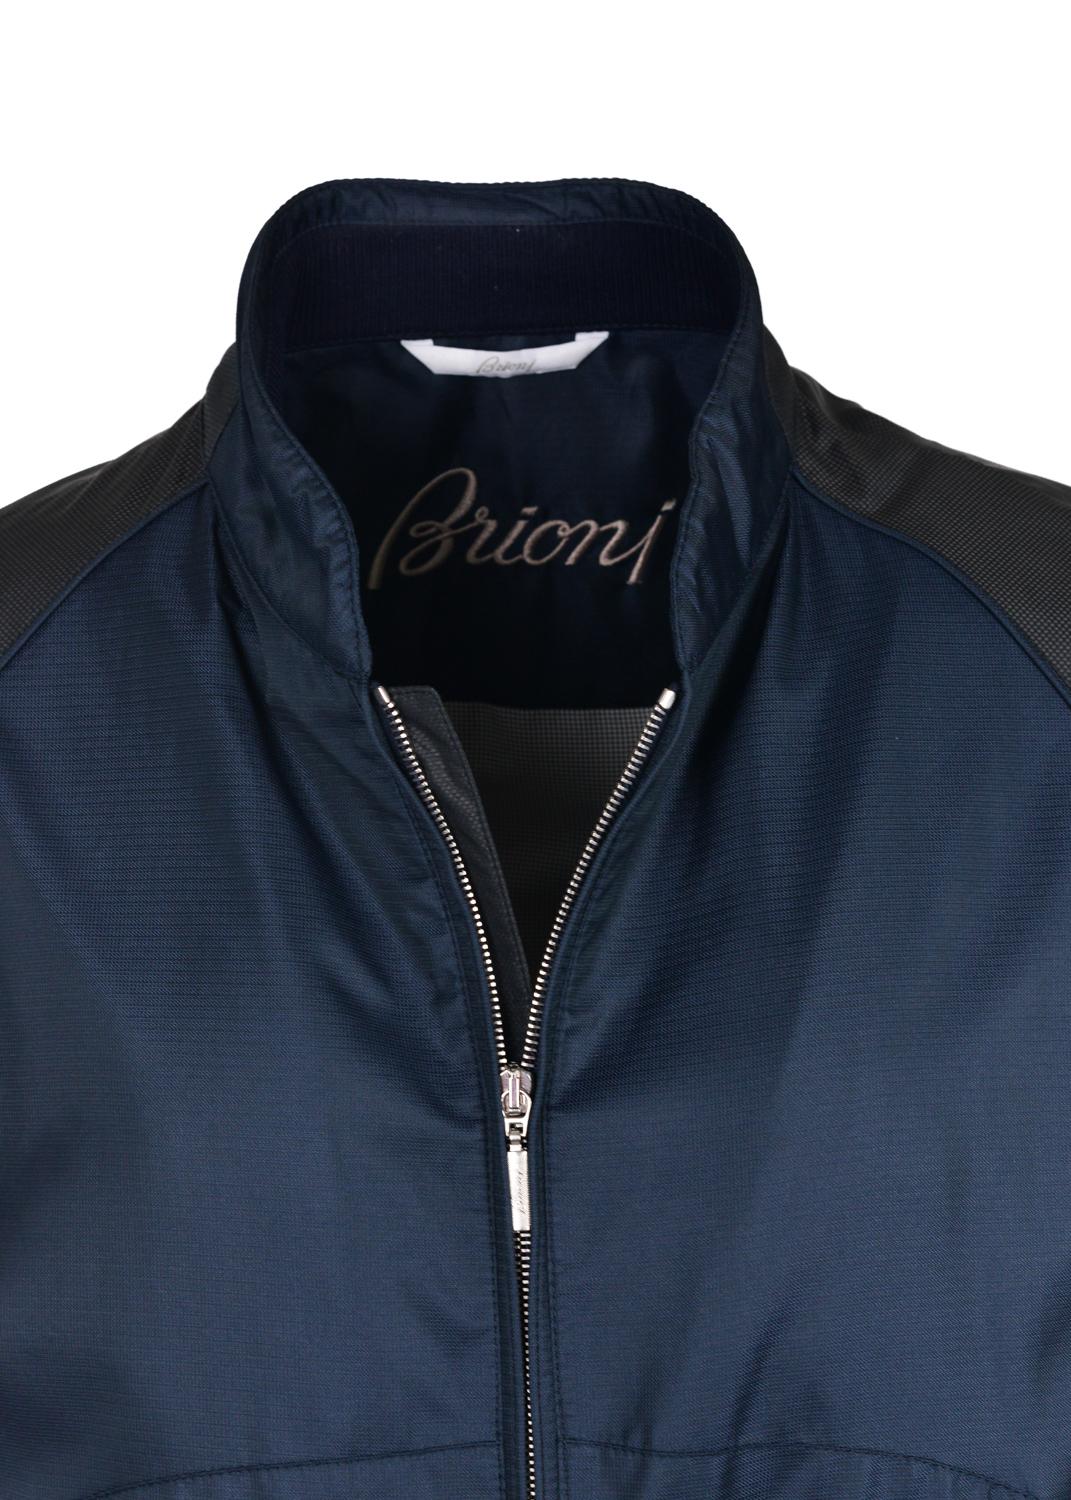 Brioni's reinvents your typical bomber jacket with this latest edition. This bomber features a black mesh inspired print paneling, silk infusion, and smoothly updated micro houndstooth interior lining. You can zip out of your bomber with confidence